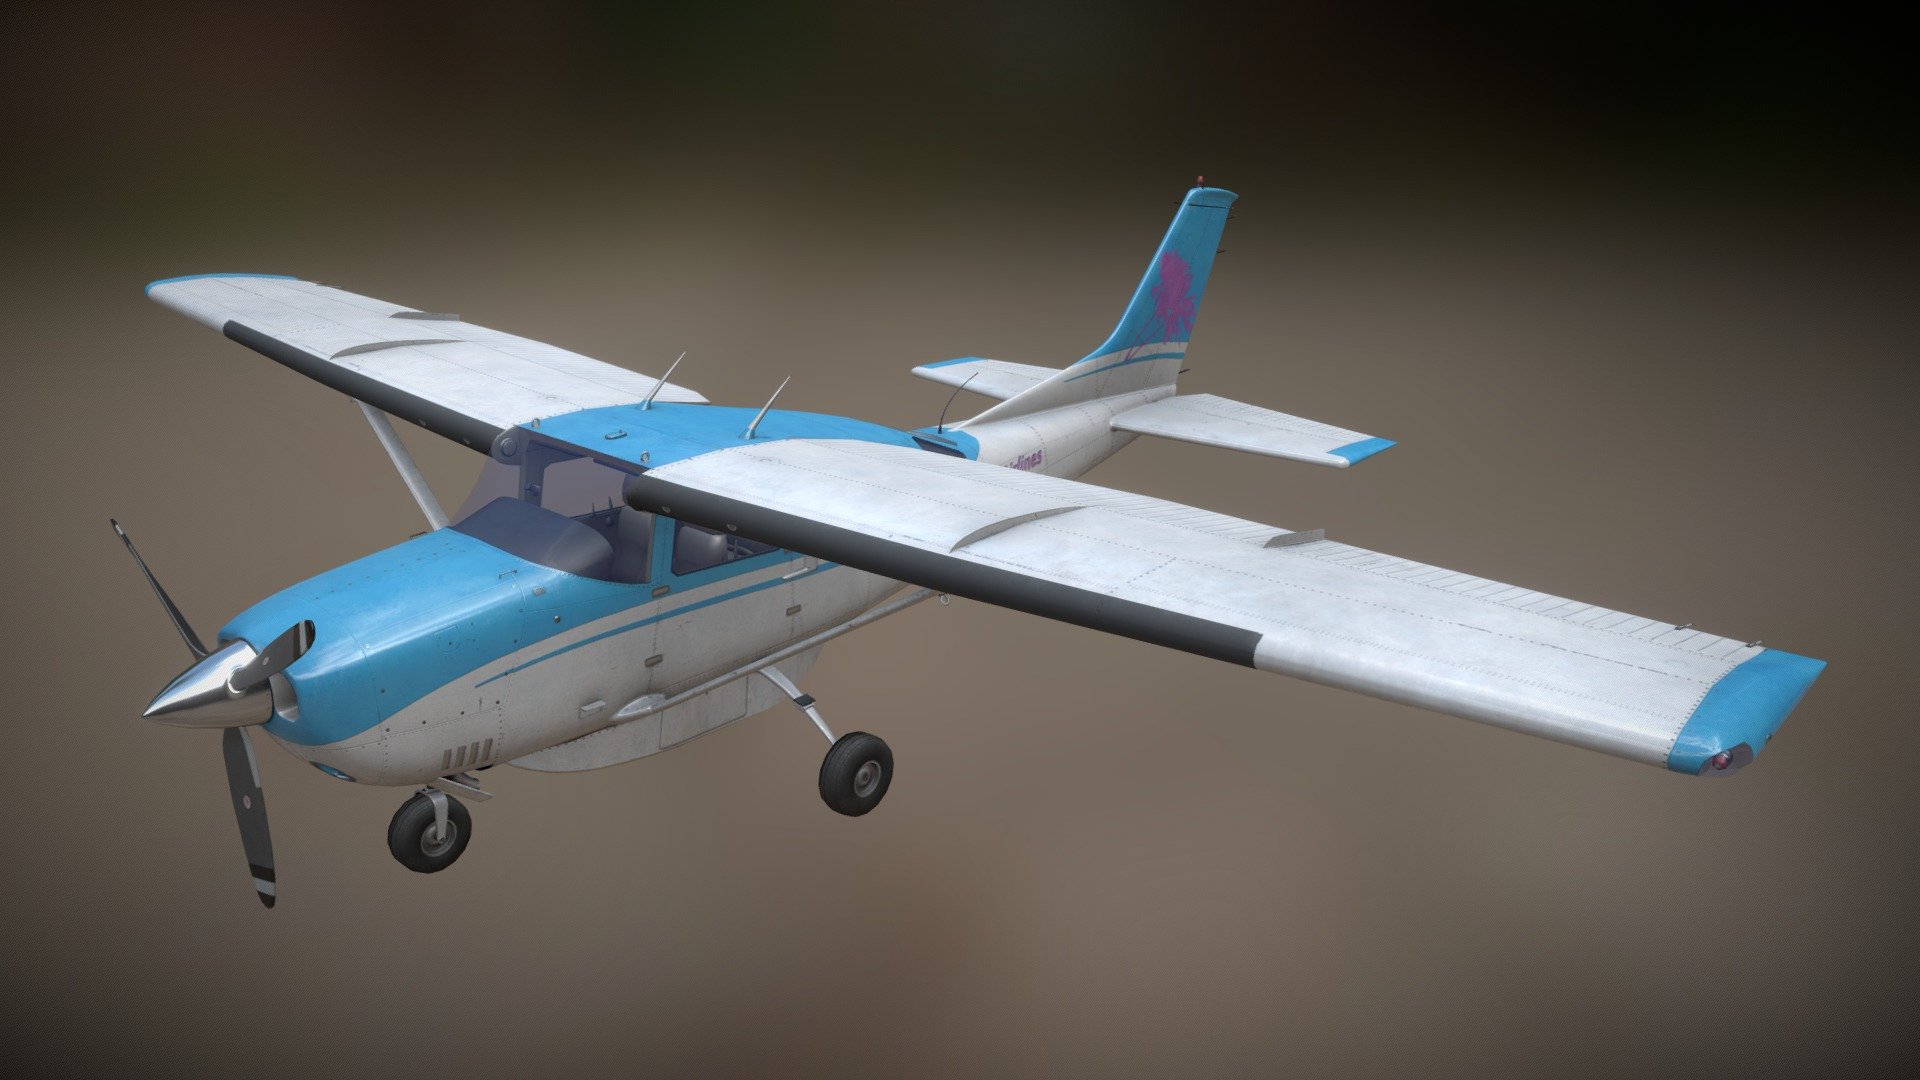 Cessna 206 Low Poly, PBR game-ready model with textures.

Modeling 3ds max, zbrush, texturing PS and Substance Painter. 
Exterior uses full set of textures: albedo, gloss, normal etc. but interior was restricted to diffuse map only 3d model